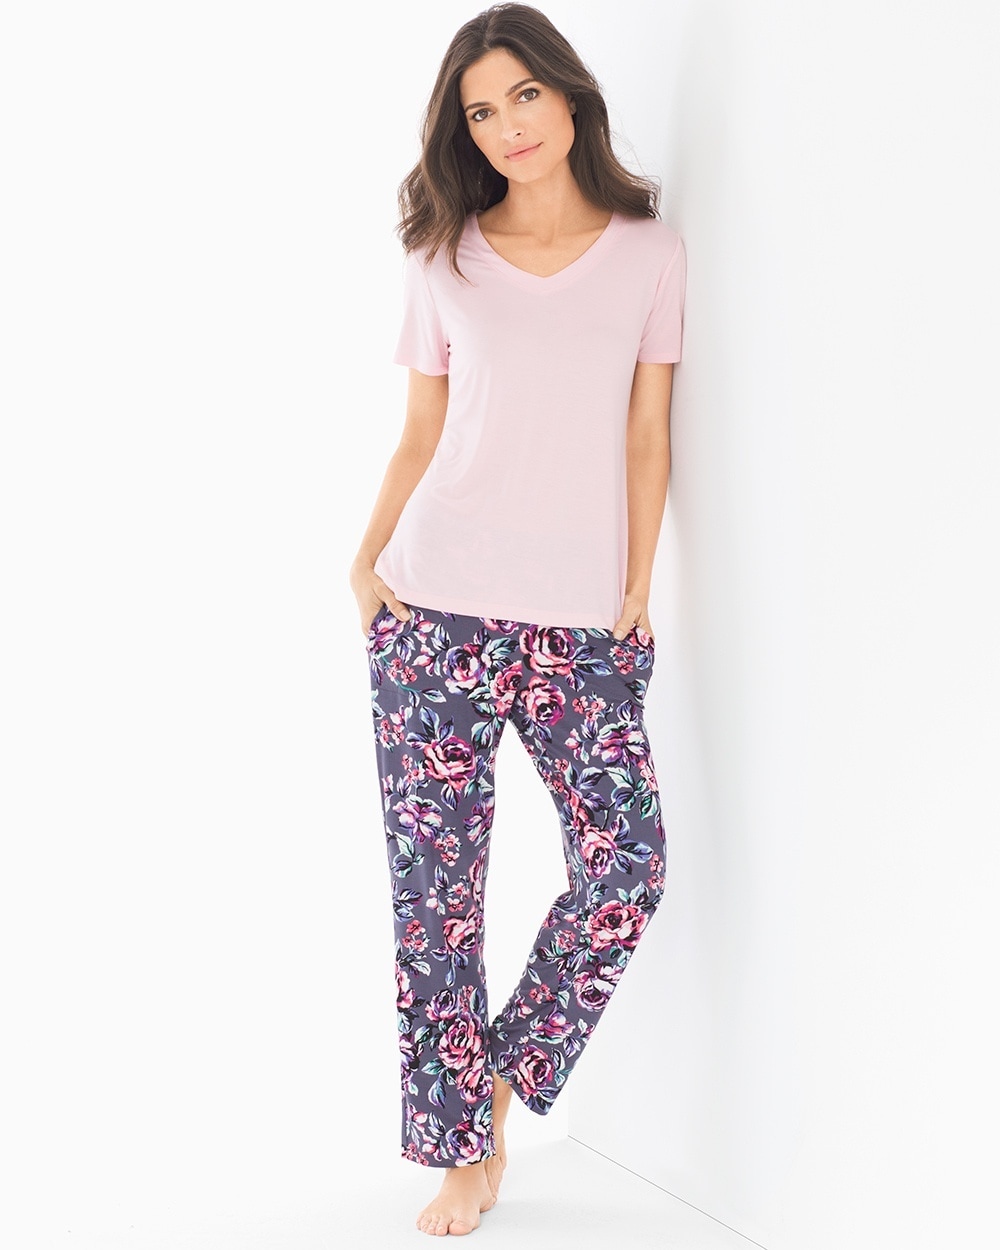 Cool Nights Ankle Length Pajama Set Roses Anchor Pearl Pink